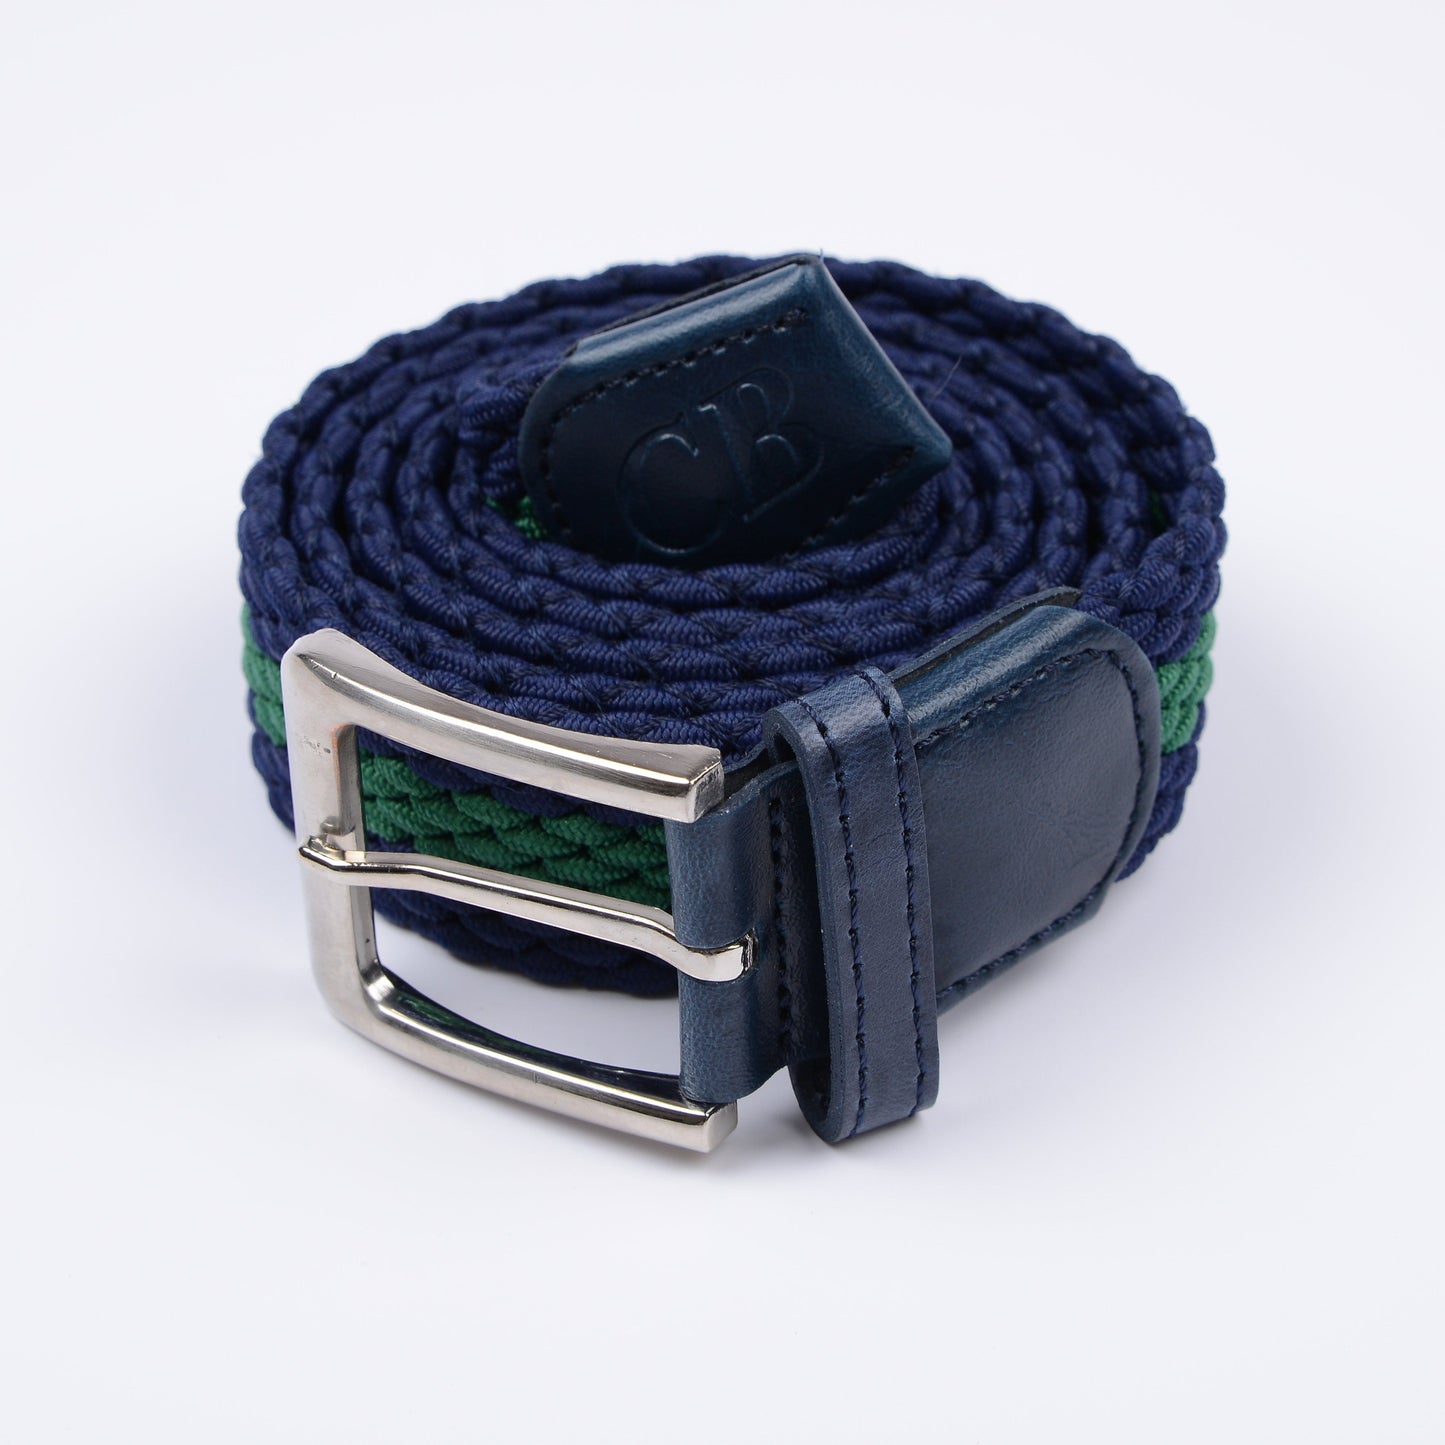 Men's Woven Stretch Belt in Navy and Green Stripe